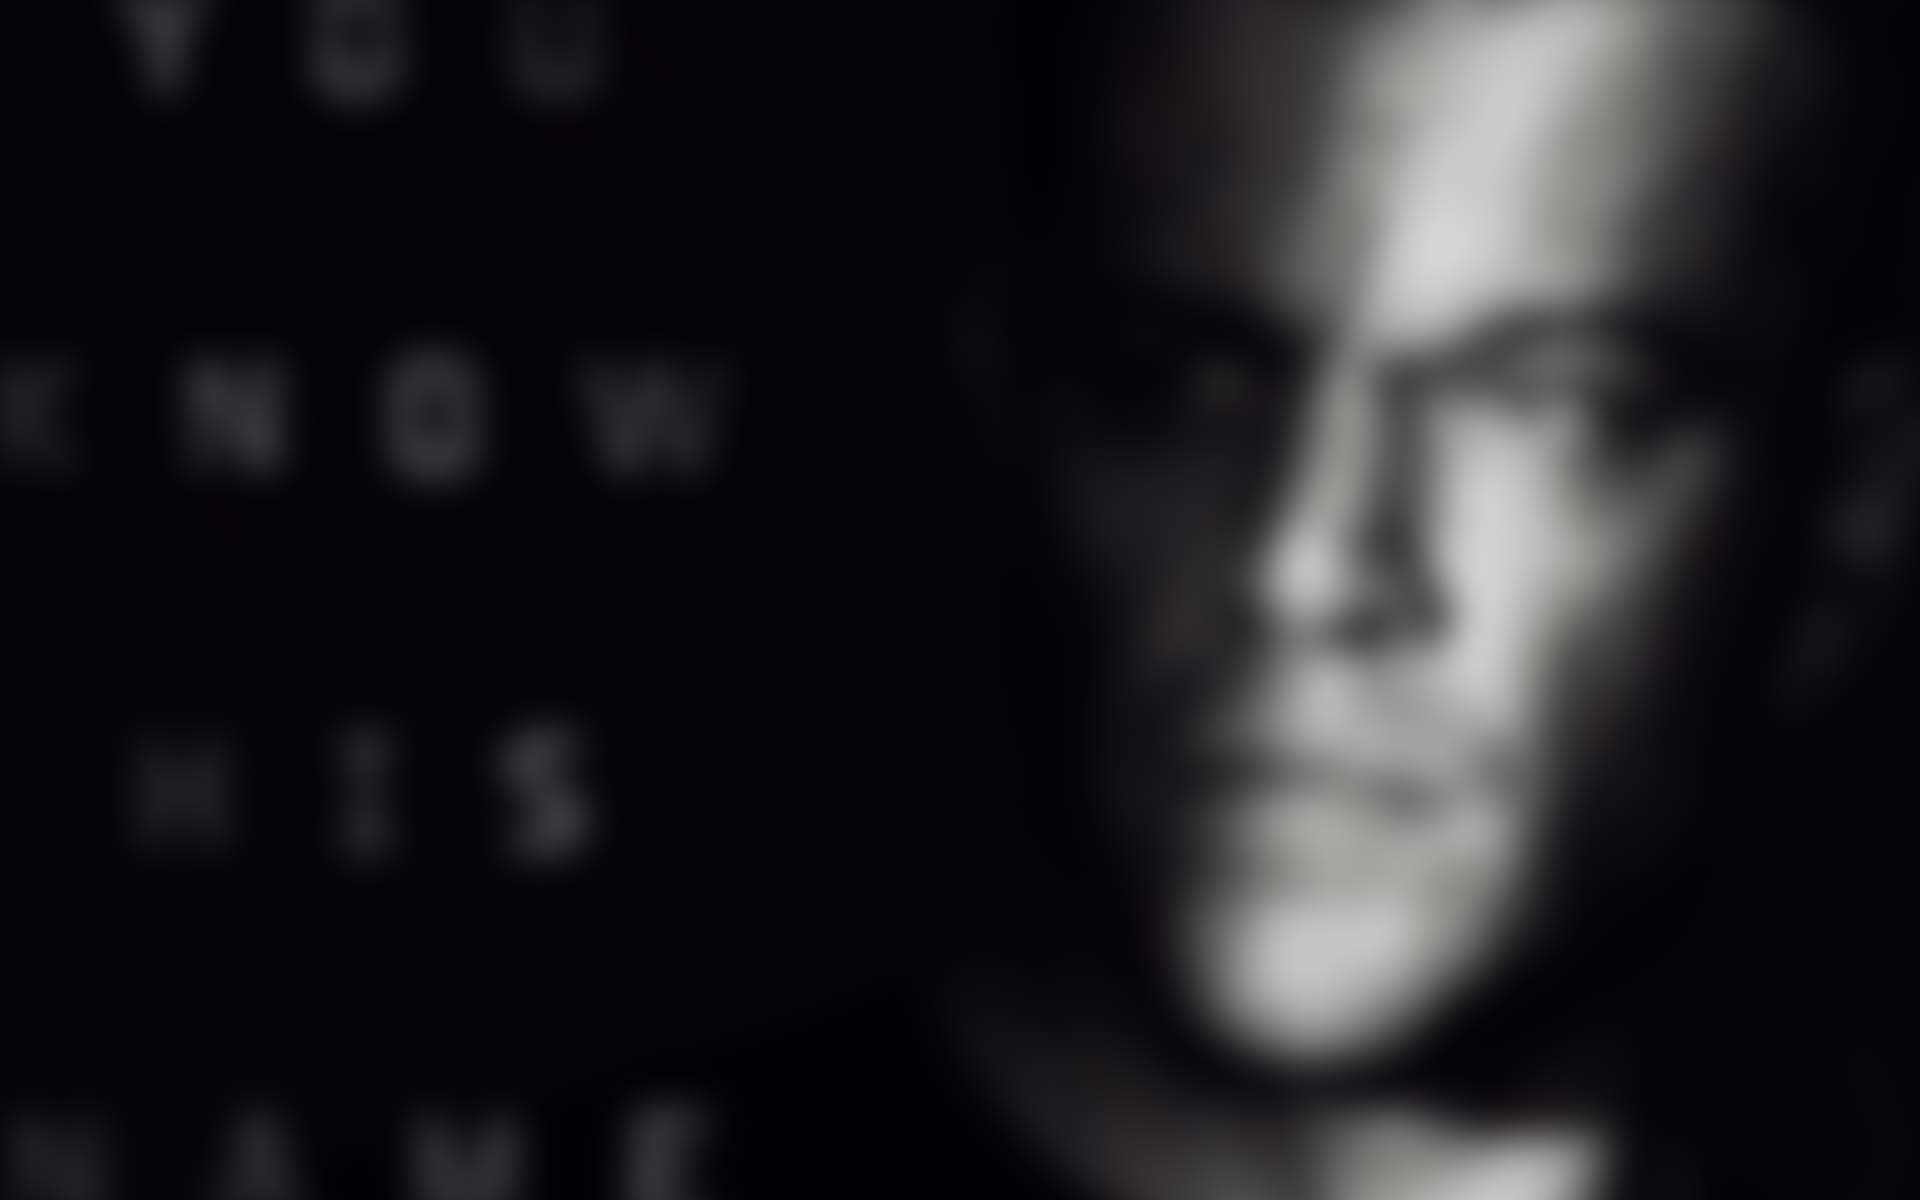 1920x1200 Jason Bourne at Fabian 8 Cinema Showtimes, Coupons, Movie Tickets, &  Theaters